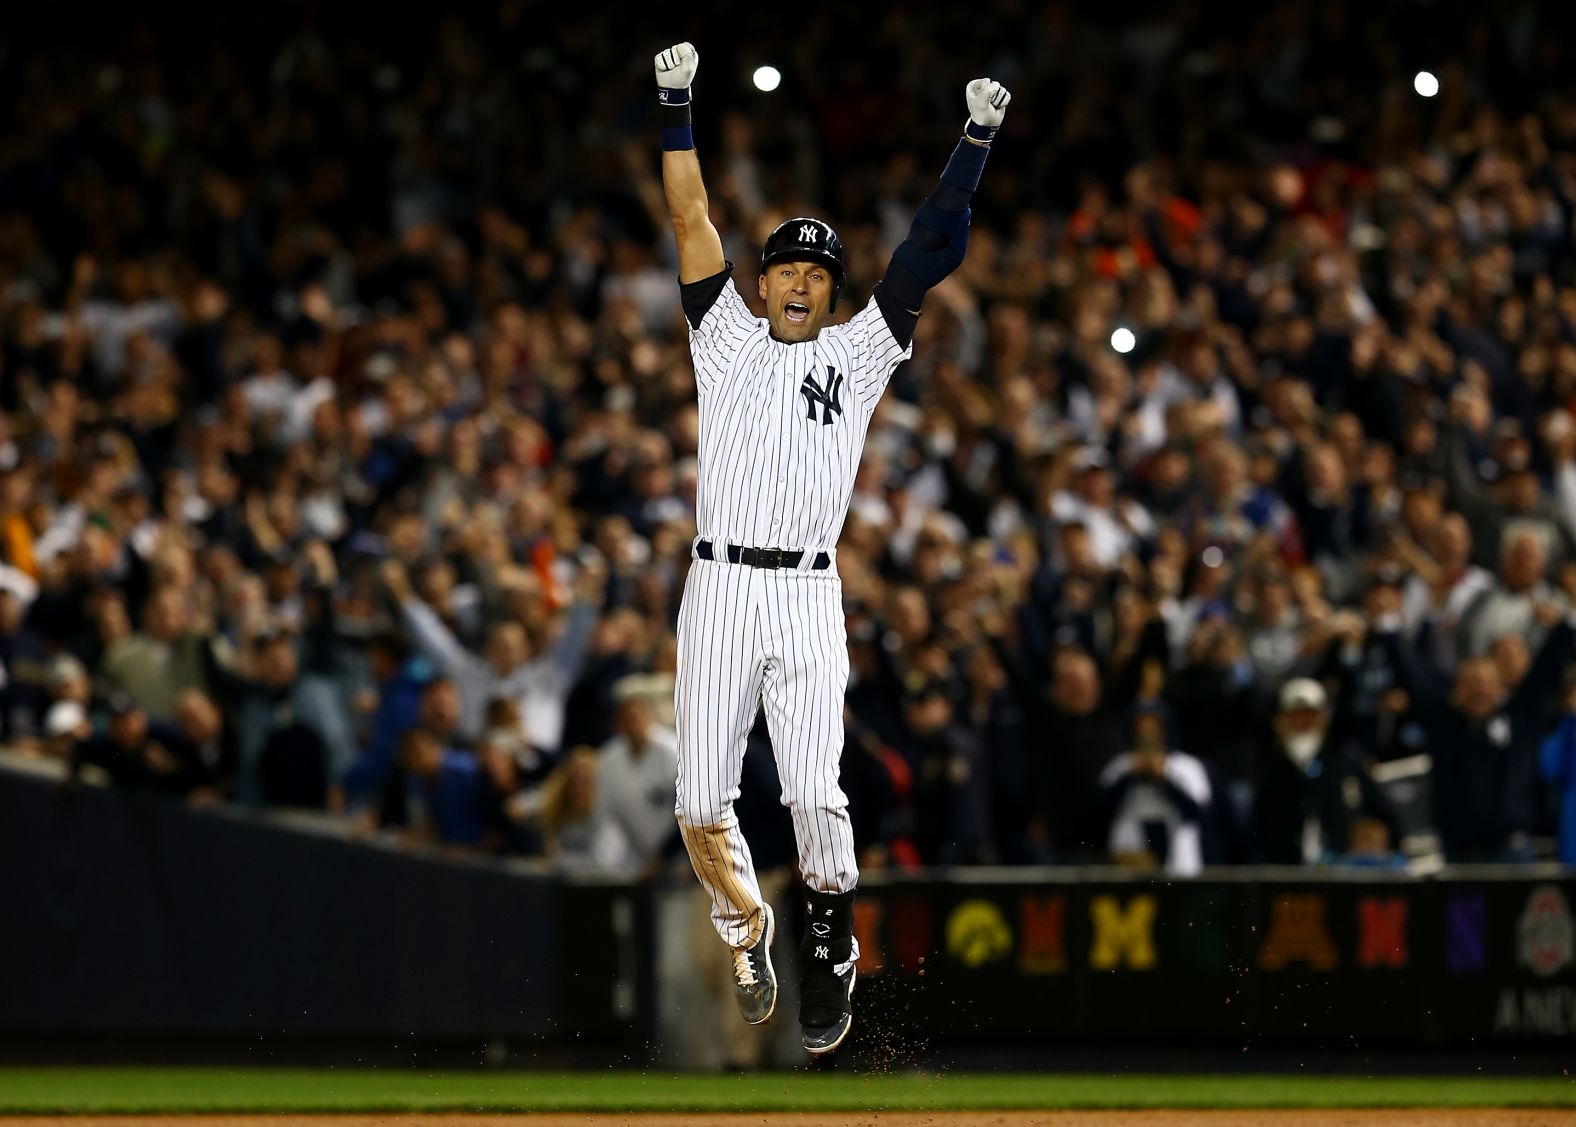 Jeter celebrates after hitting the game-winning RBI in his last game at Yankee Stadium. "I don't think there's a more fitting way for it to end," Yankees manager Joe Girardi said.